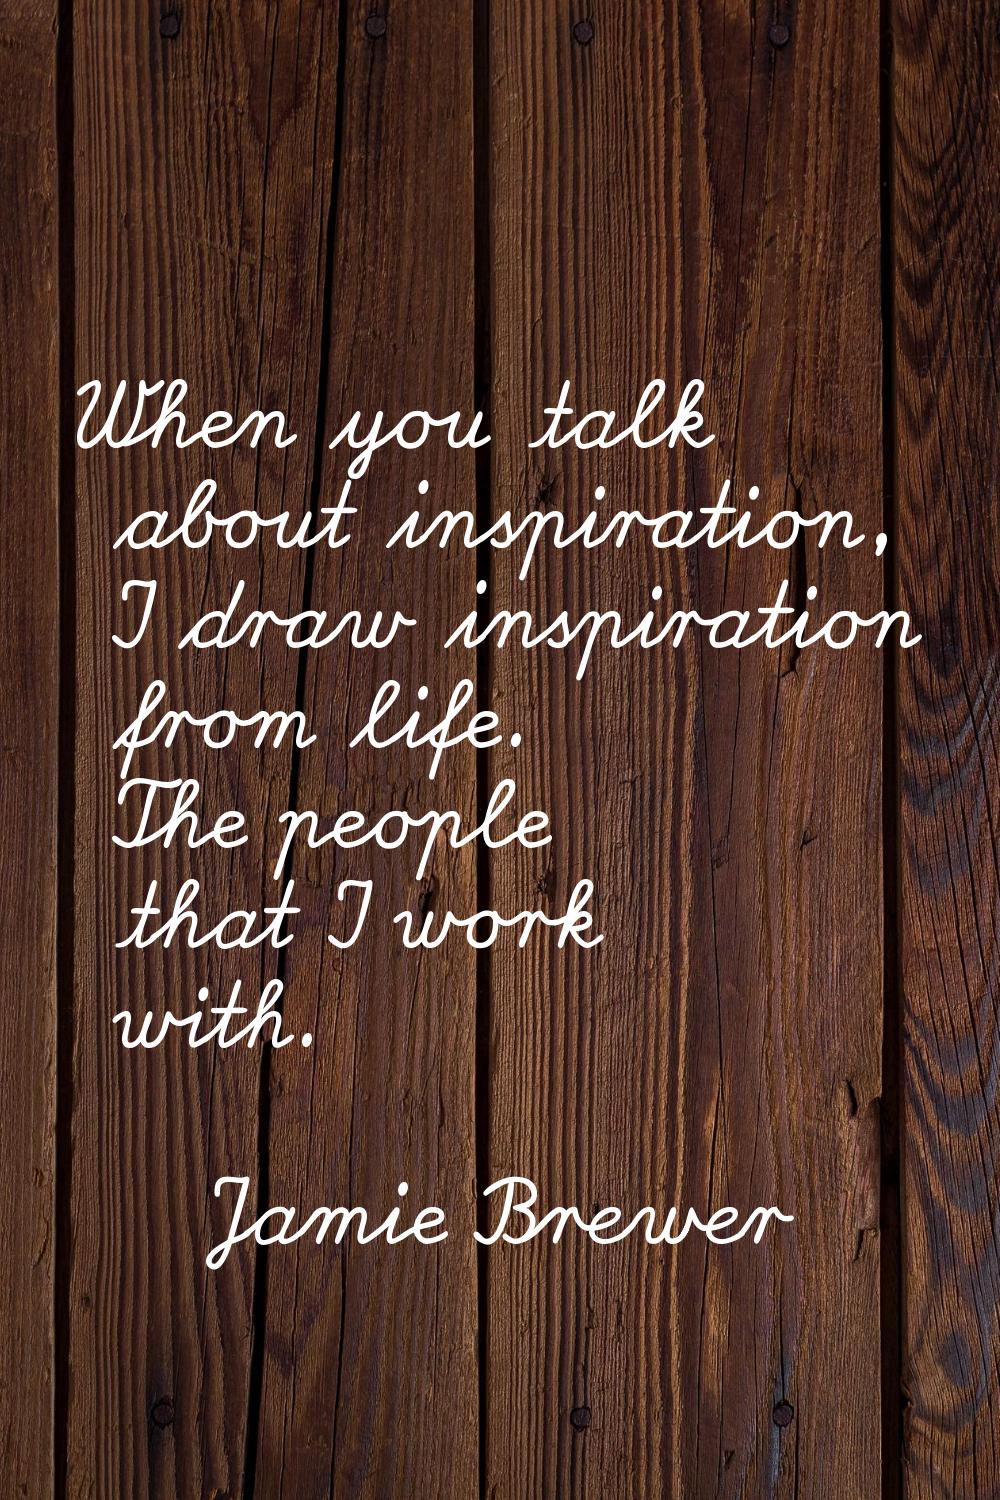 When you talk about inspiration, I draw inspiration from life. The people that I work with.